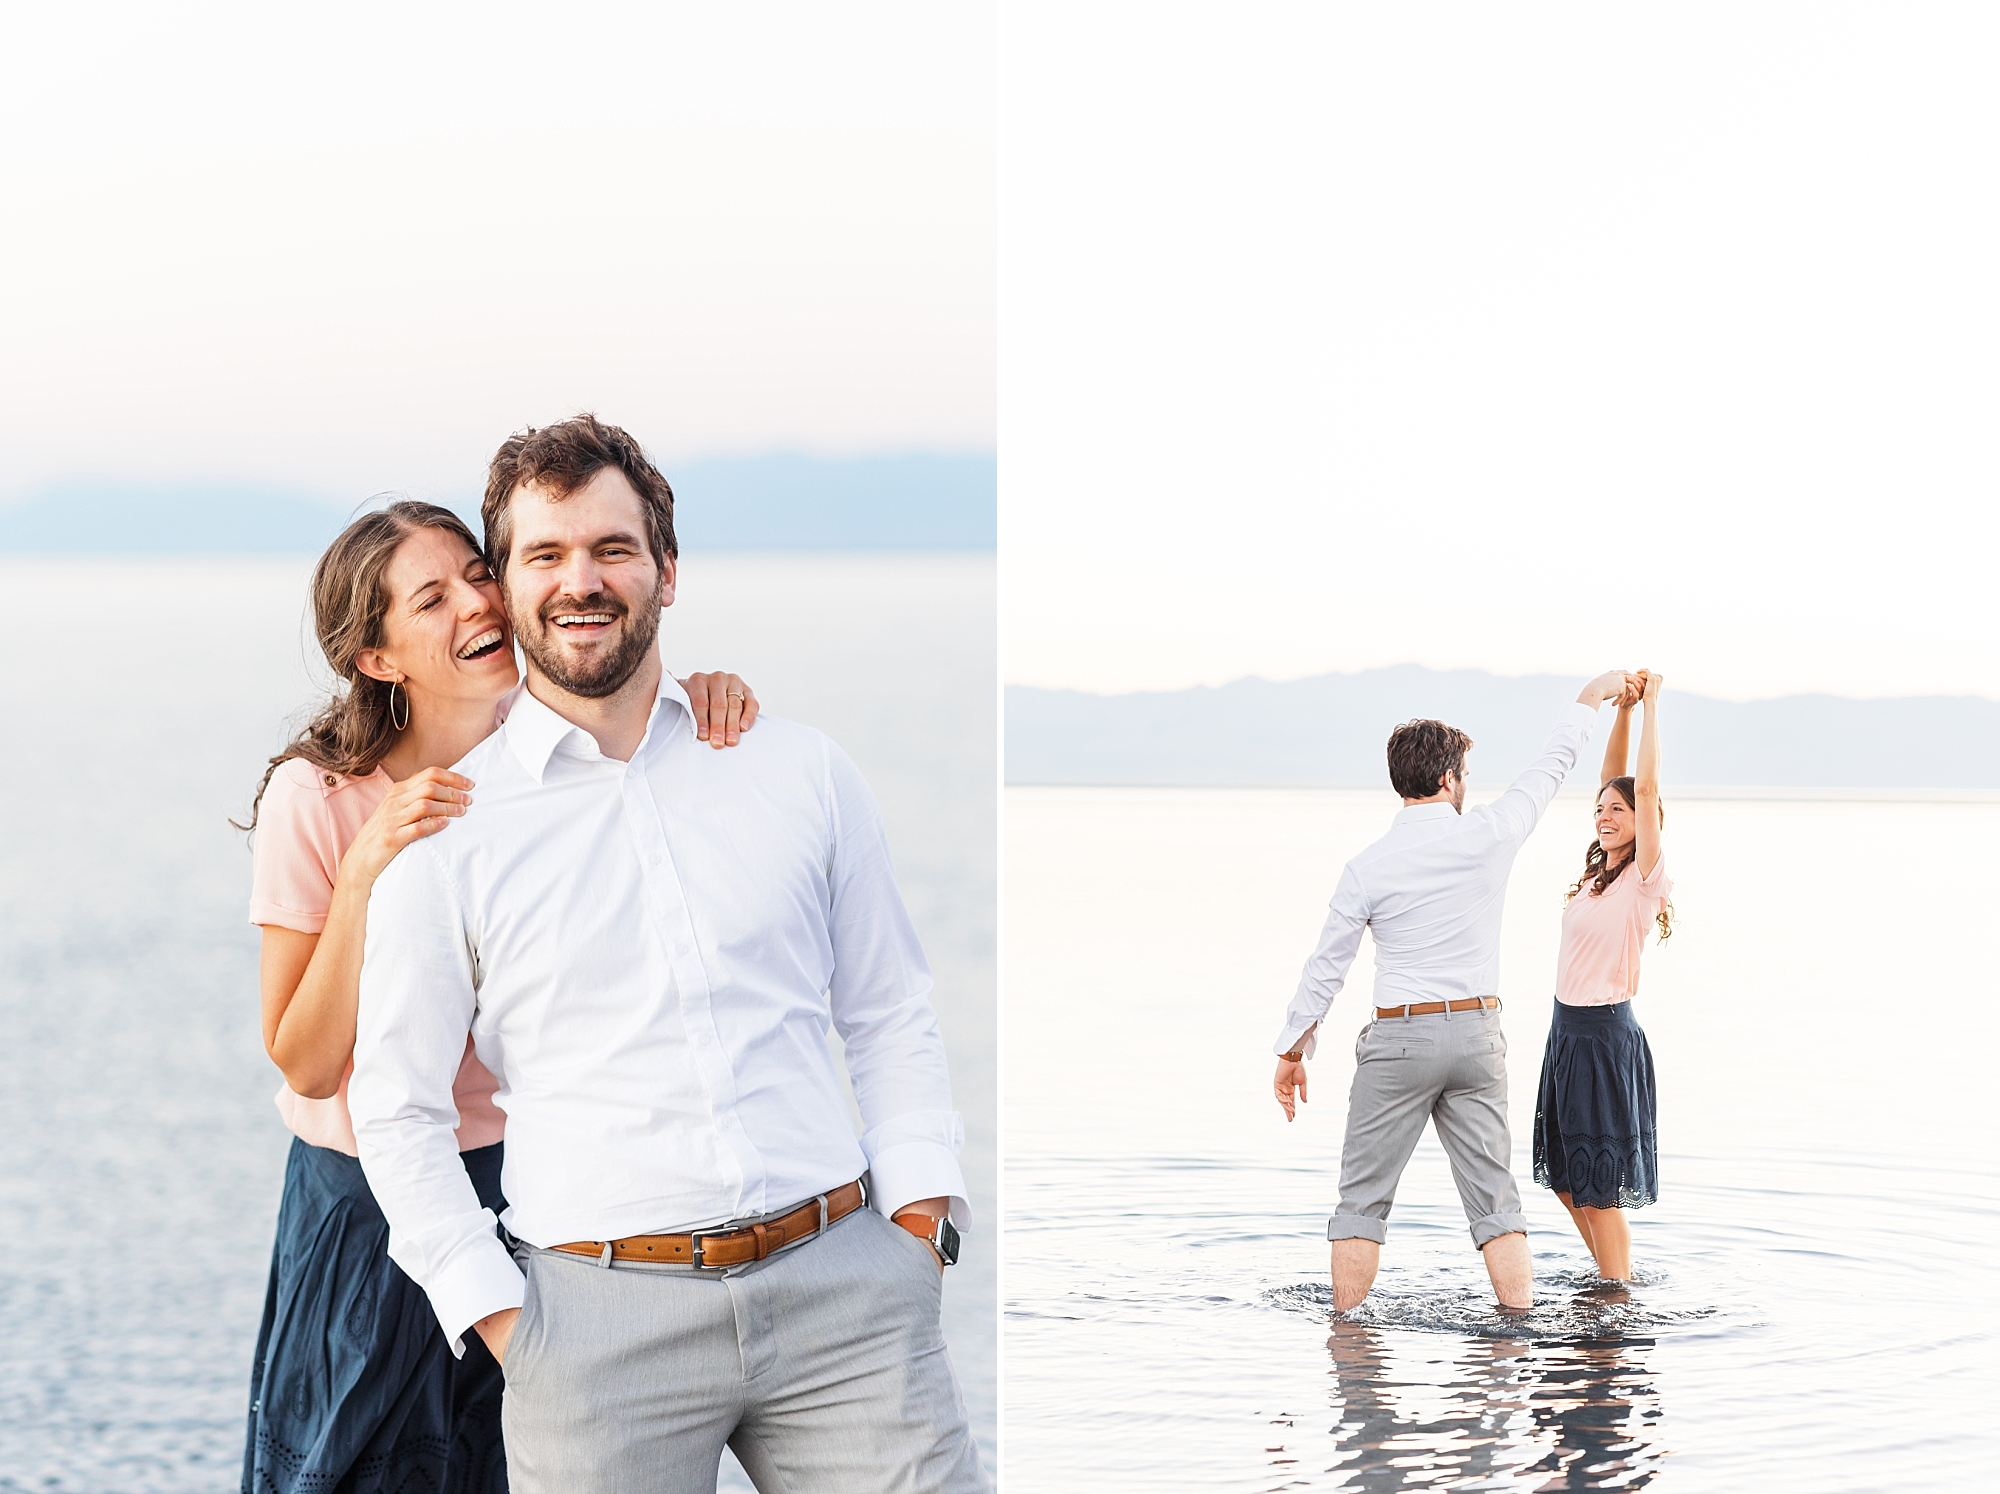 Summer Sunset with beautiful cotton candy skies at the Great Saltair Engagement Session